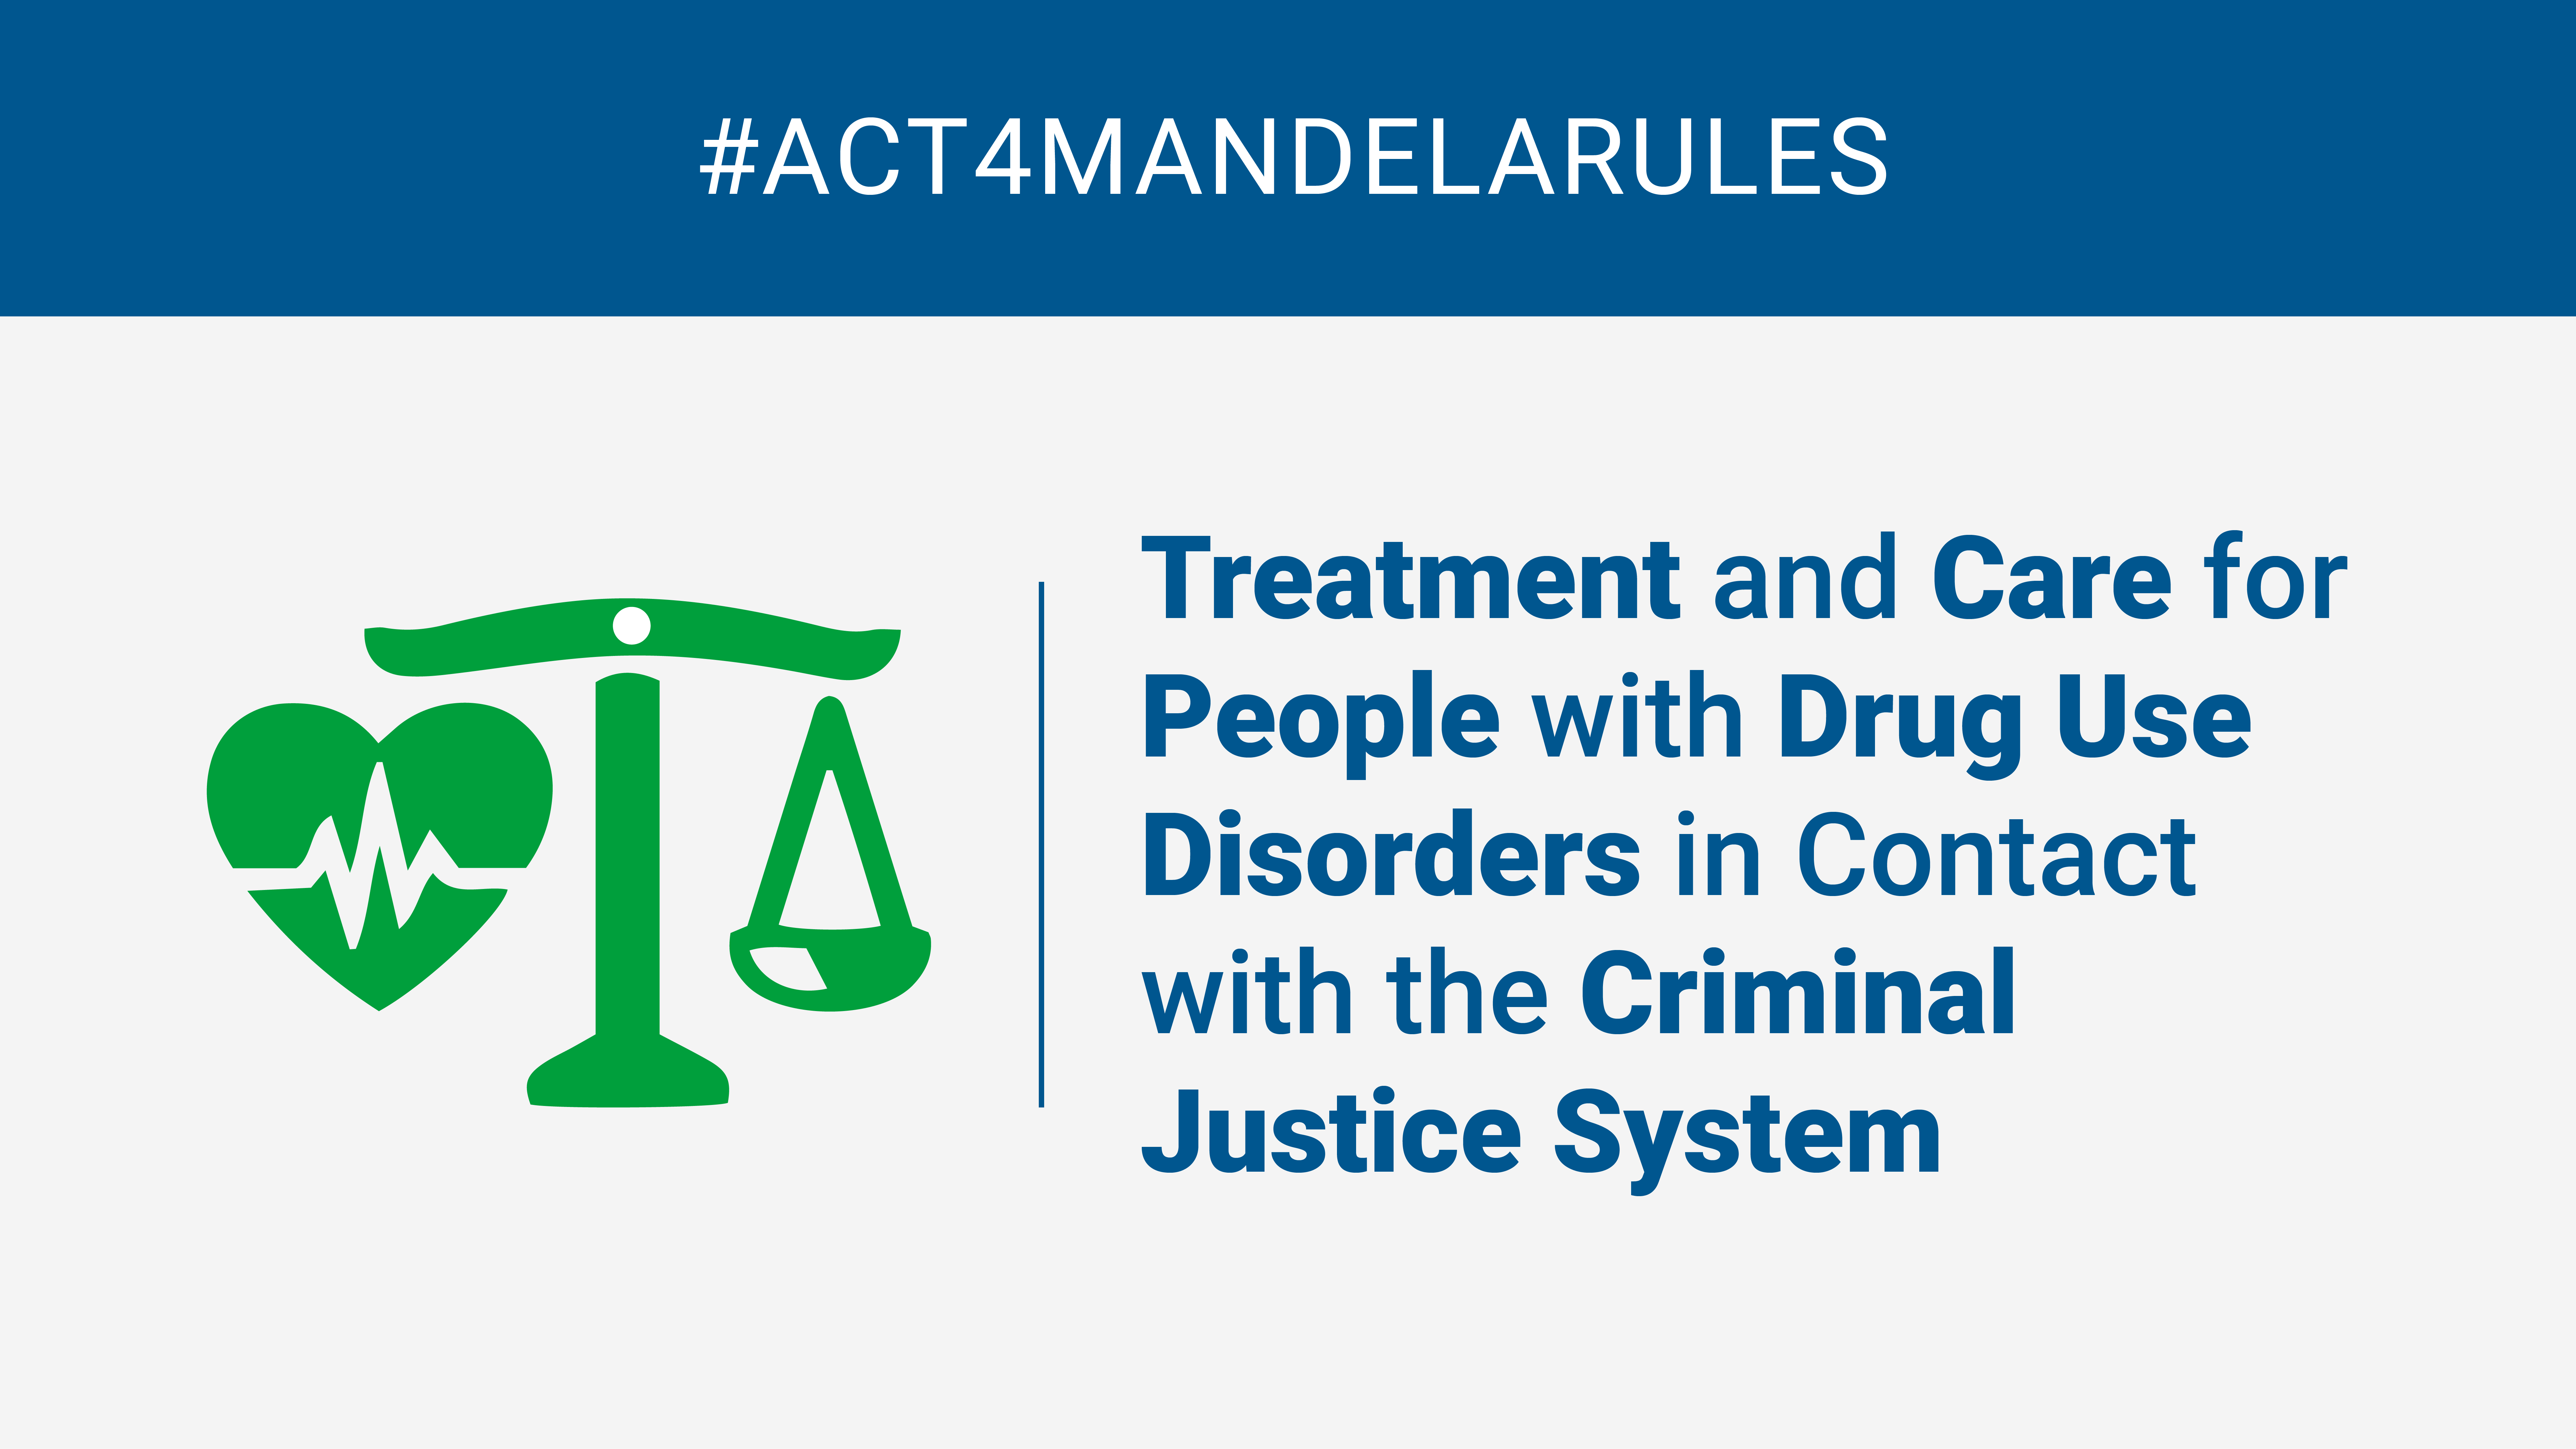 Treatment and Care for People with Drug Use Disorders in Contact with the Criminal Justice System